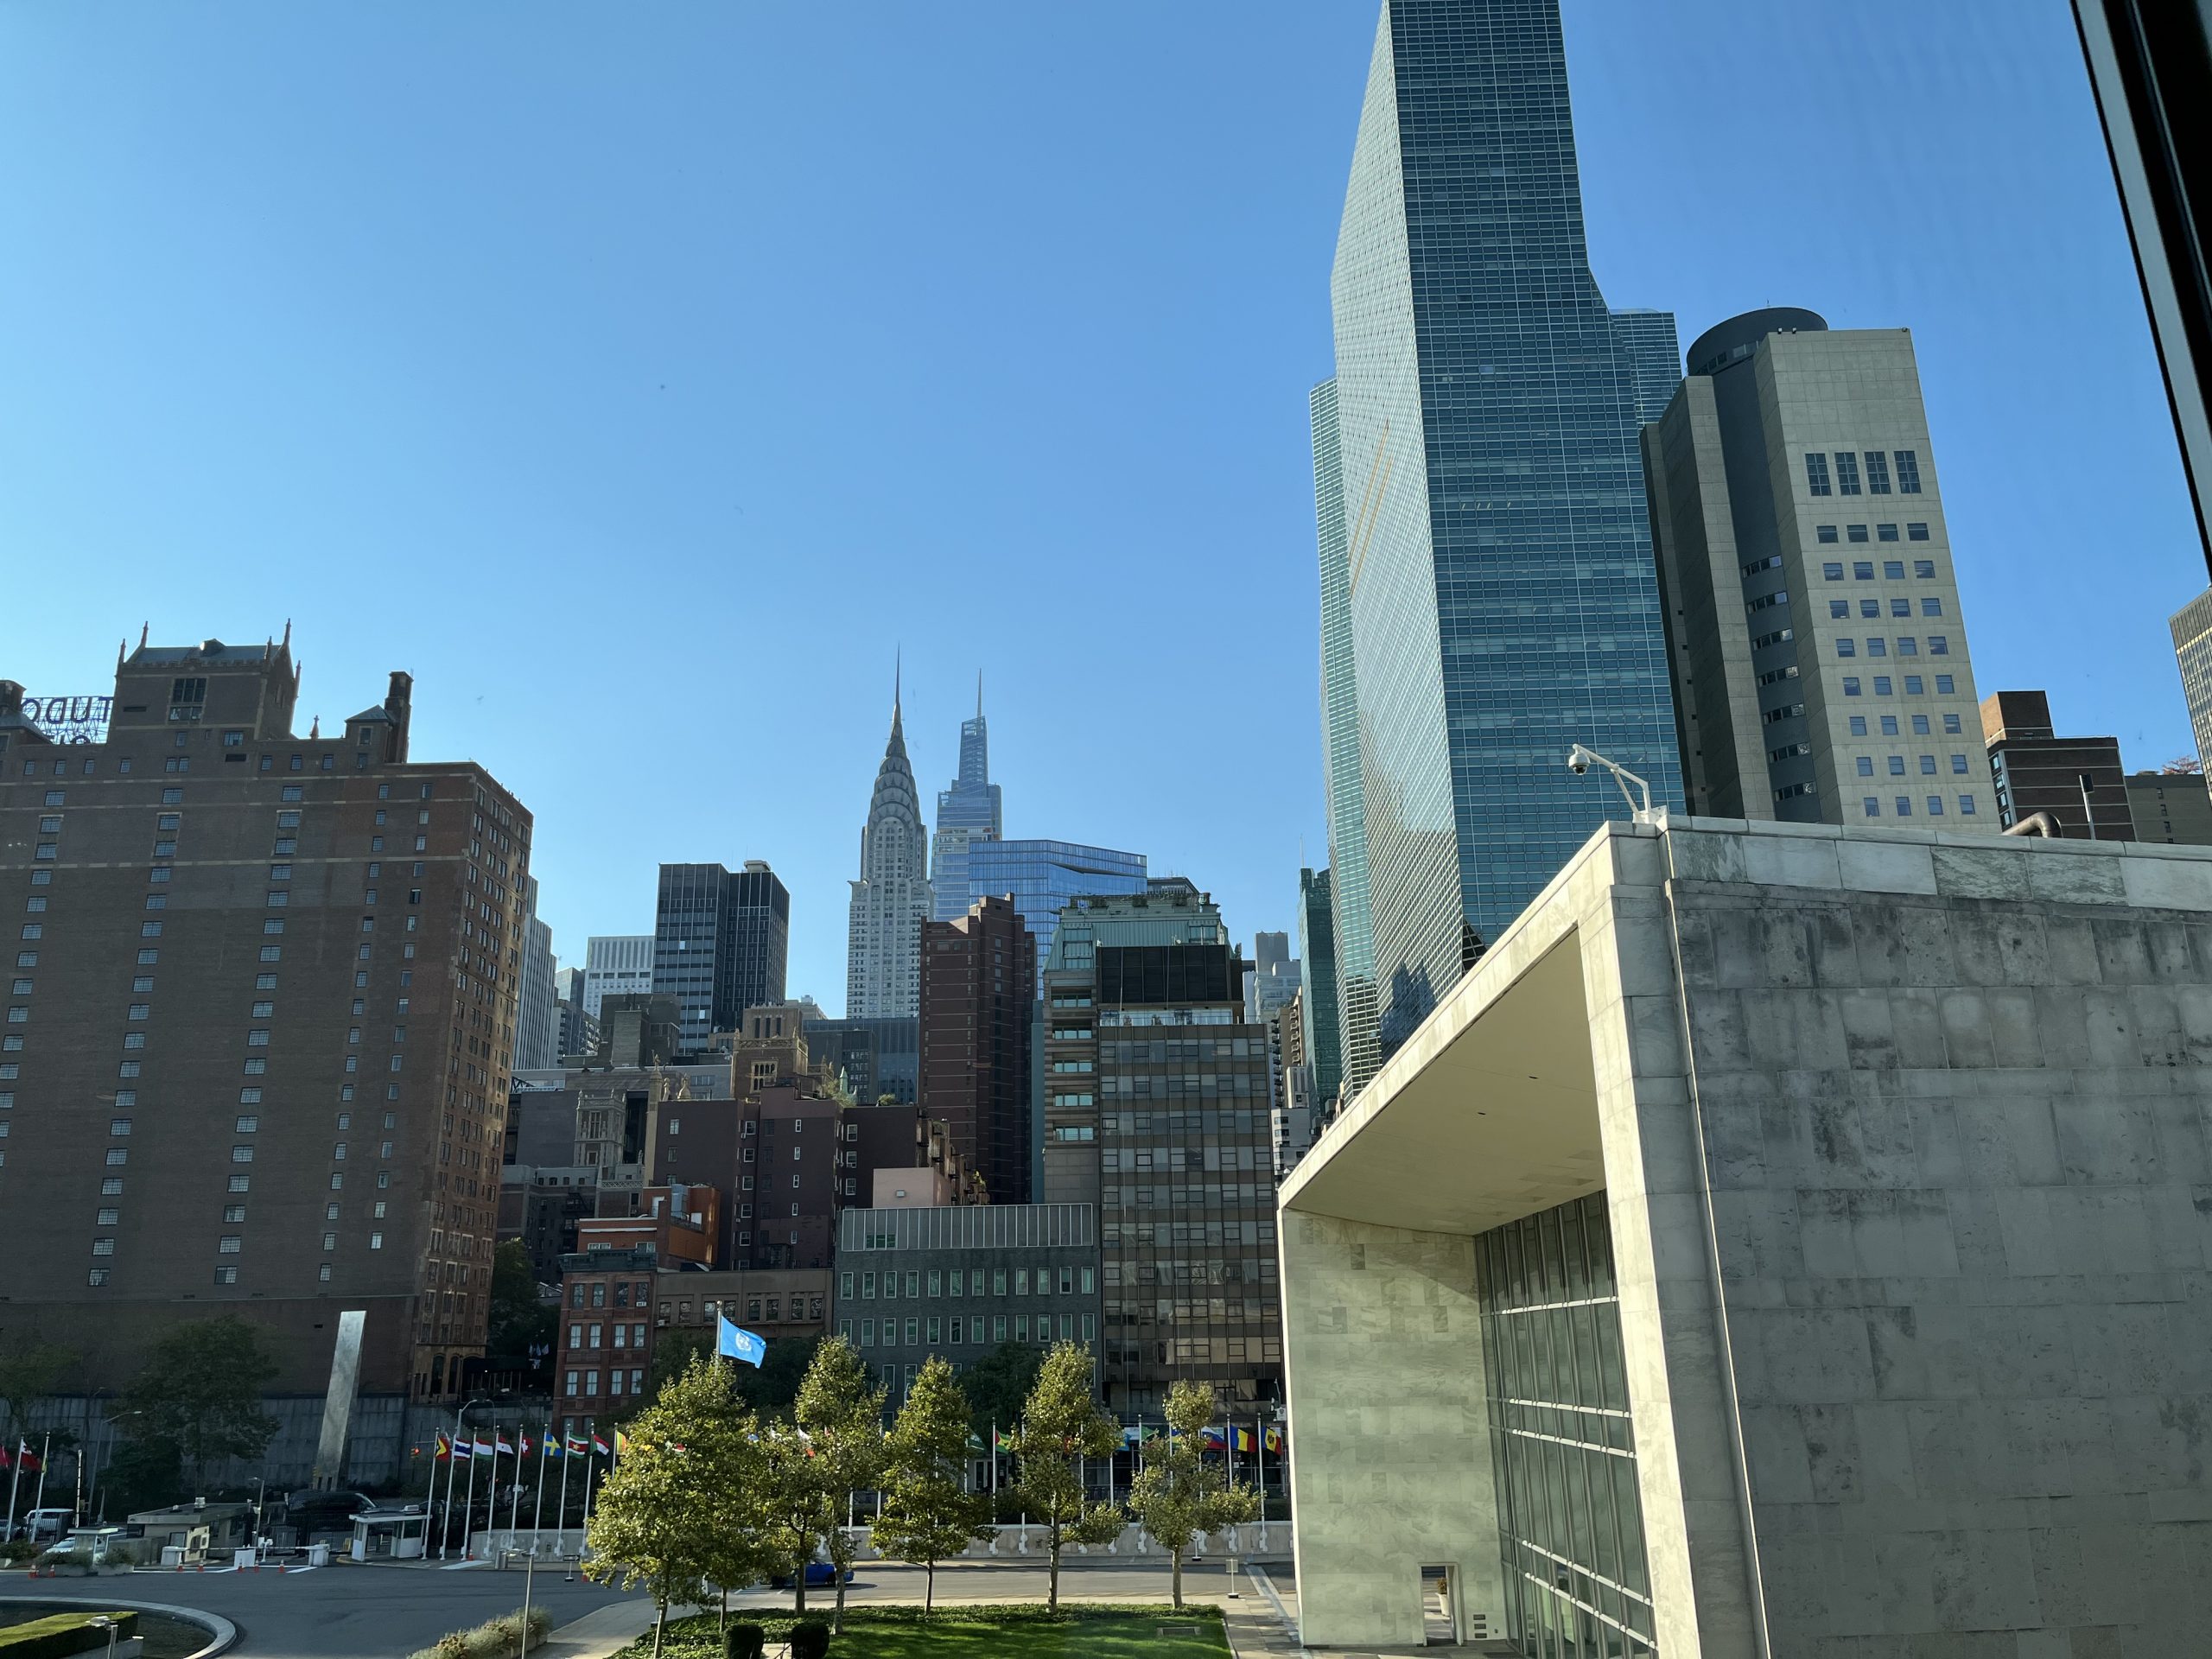 The Chrysler Building from the UN